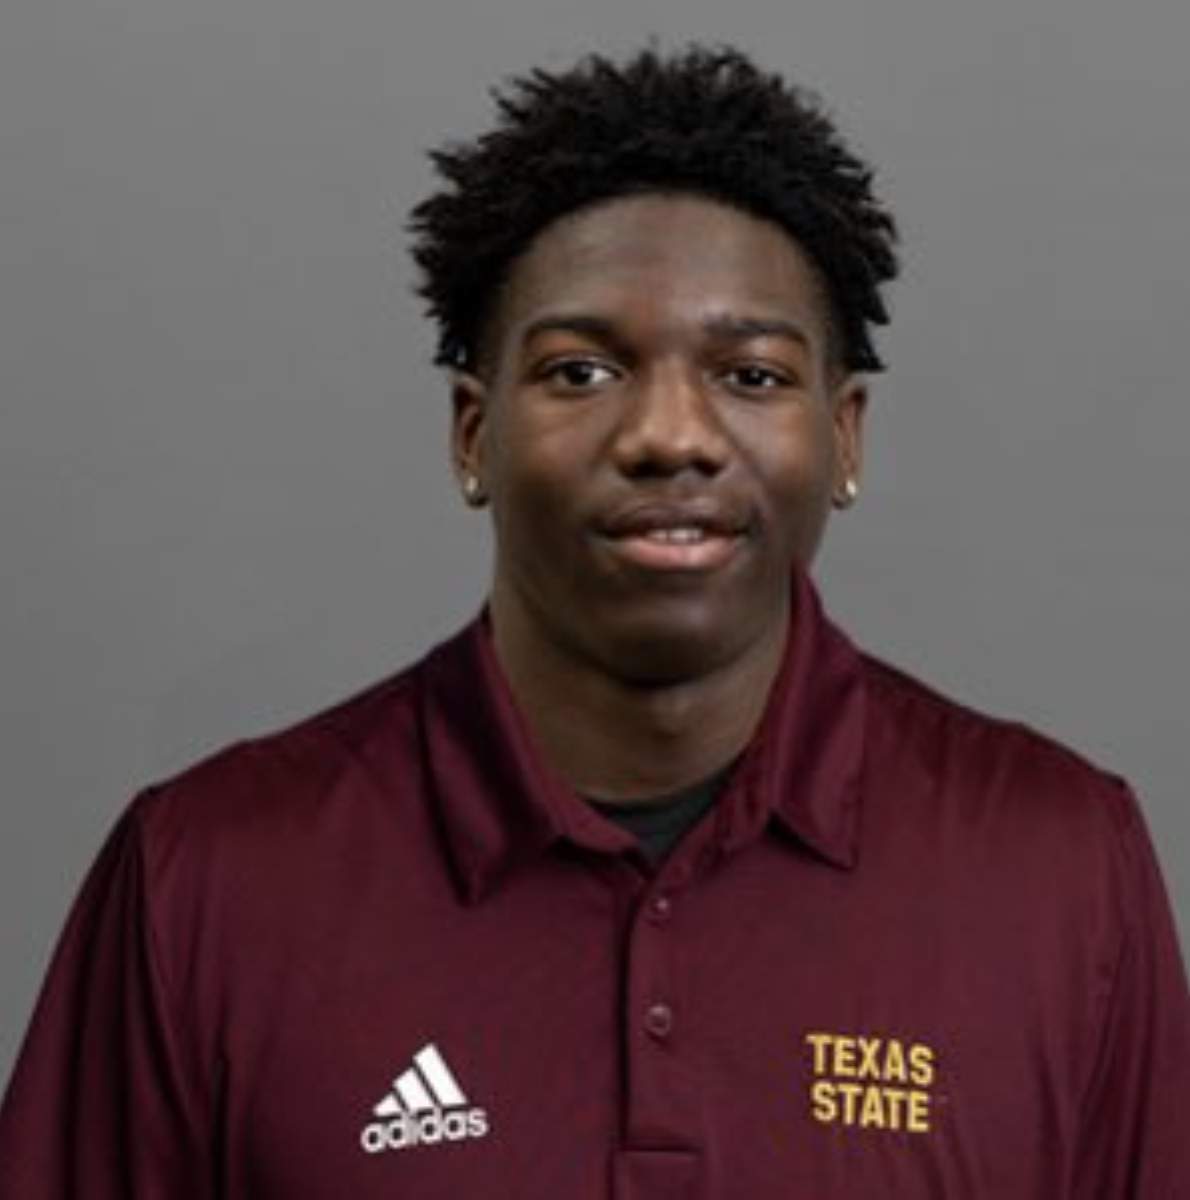 Texas State football player shot, killed in San Marcos, police say